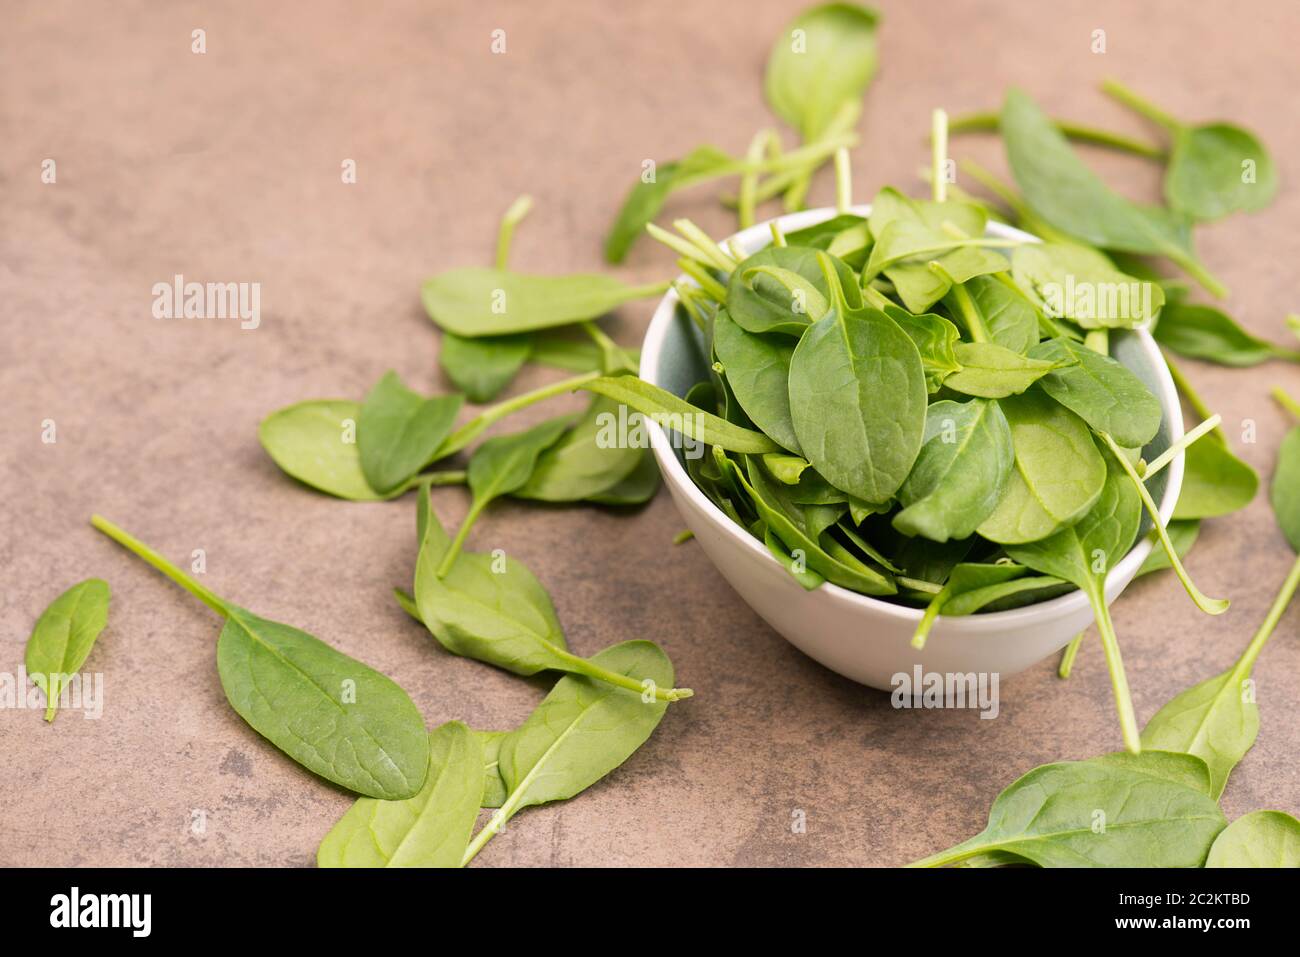 Fresh green spinach leaves on a brown textured background Stock Photo